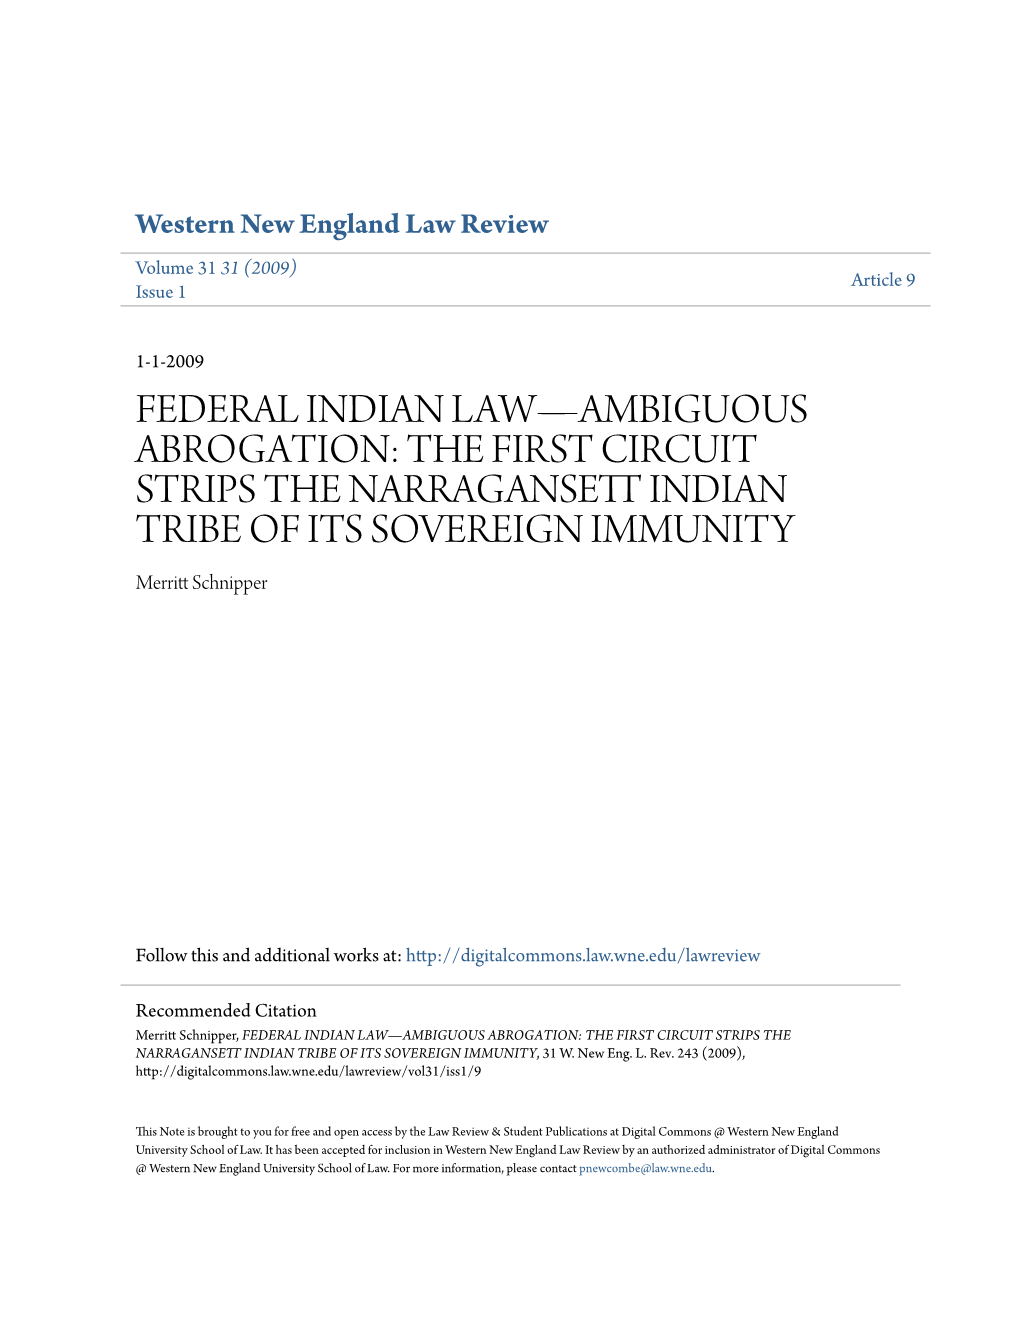 FEDERAL INDIAN LAW—AMBIGUOUS ABROGATION: the FIRST CIRCUIT STRIPS the NARRAGANSETT INDIAN TRIBE of ITS SOVEREIGN IMMUNITY Merritt Chnis Pper